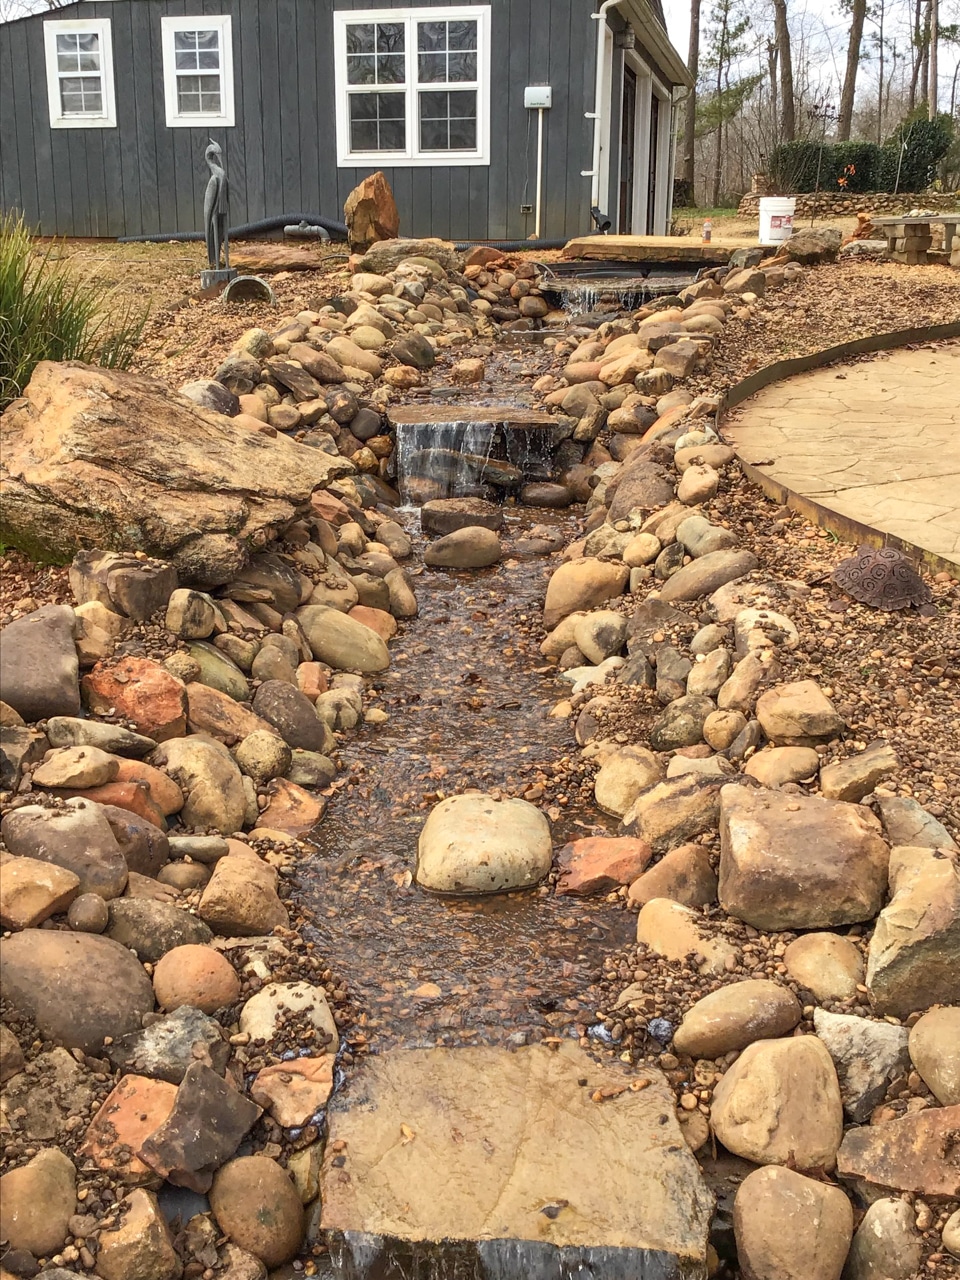 Water Feature Renovation